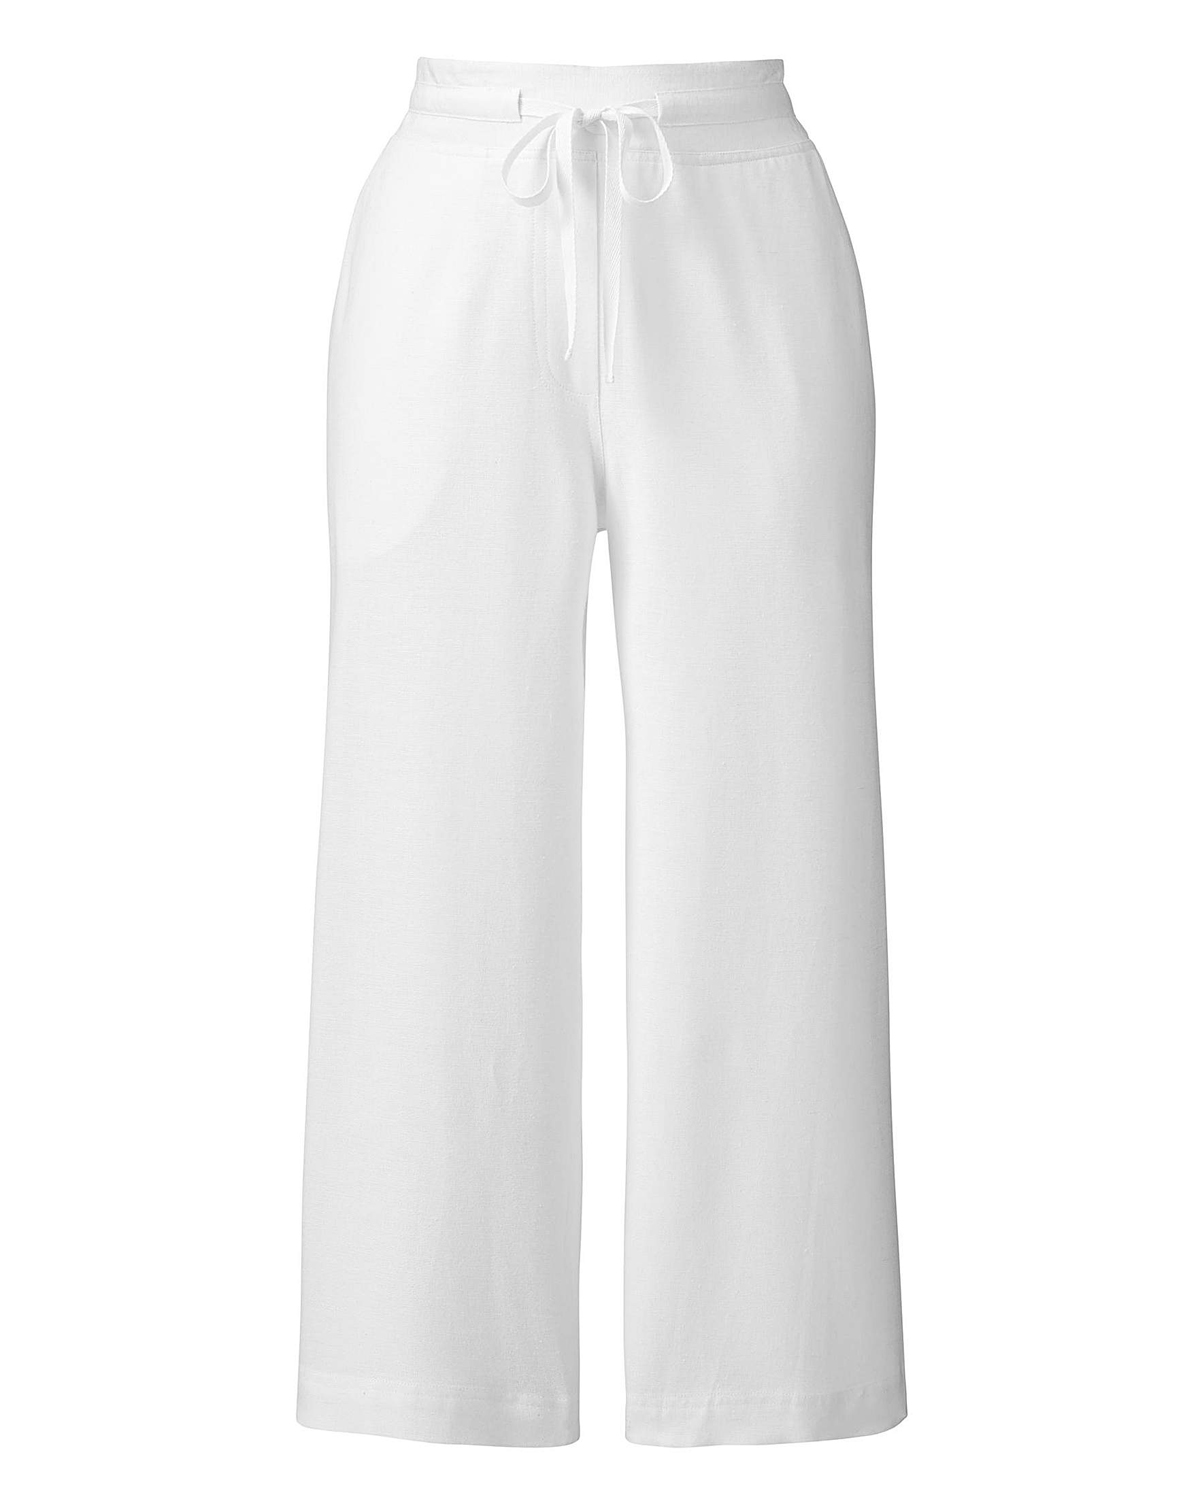 LabelBe WHITE Linen Mix Cropped Trousers - Plus Size 14 to 28